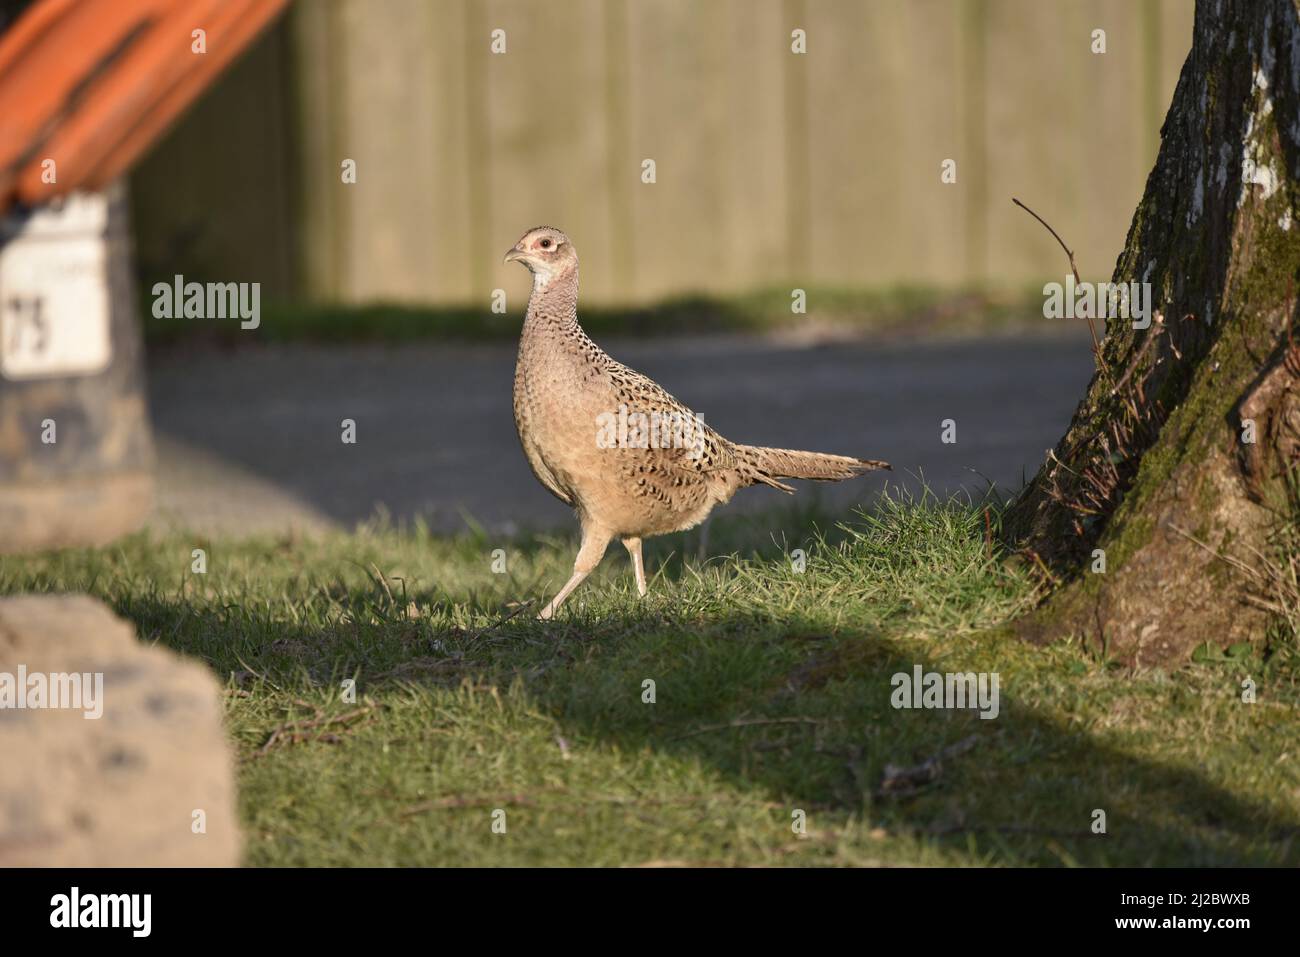 Close-Up Left-Profile Image of a Female Common Pheasant (Phasianus colchicus) Walking Across Grass on a Sunny Day with Left Foot Raised Forward in UK Stock Photo